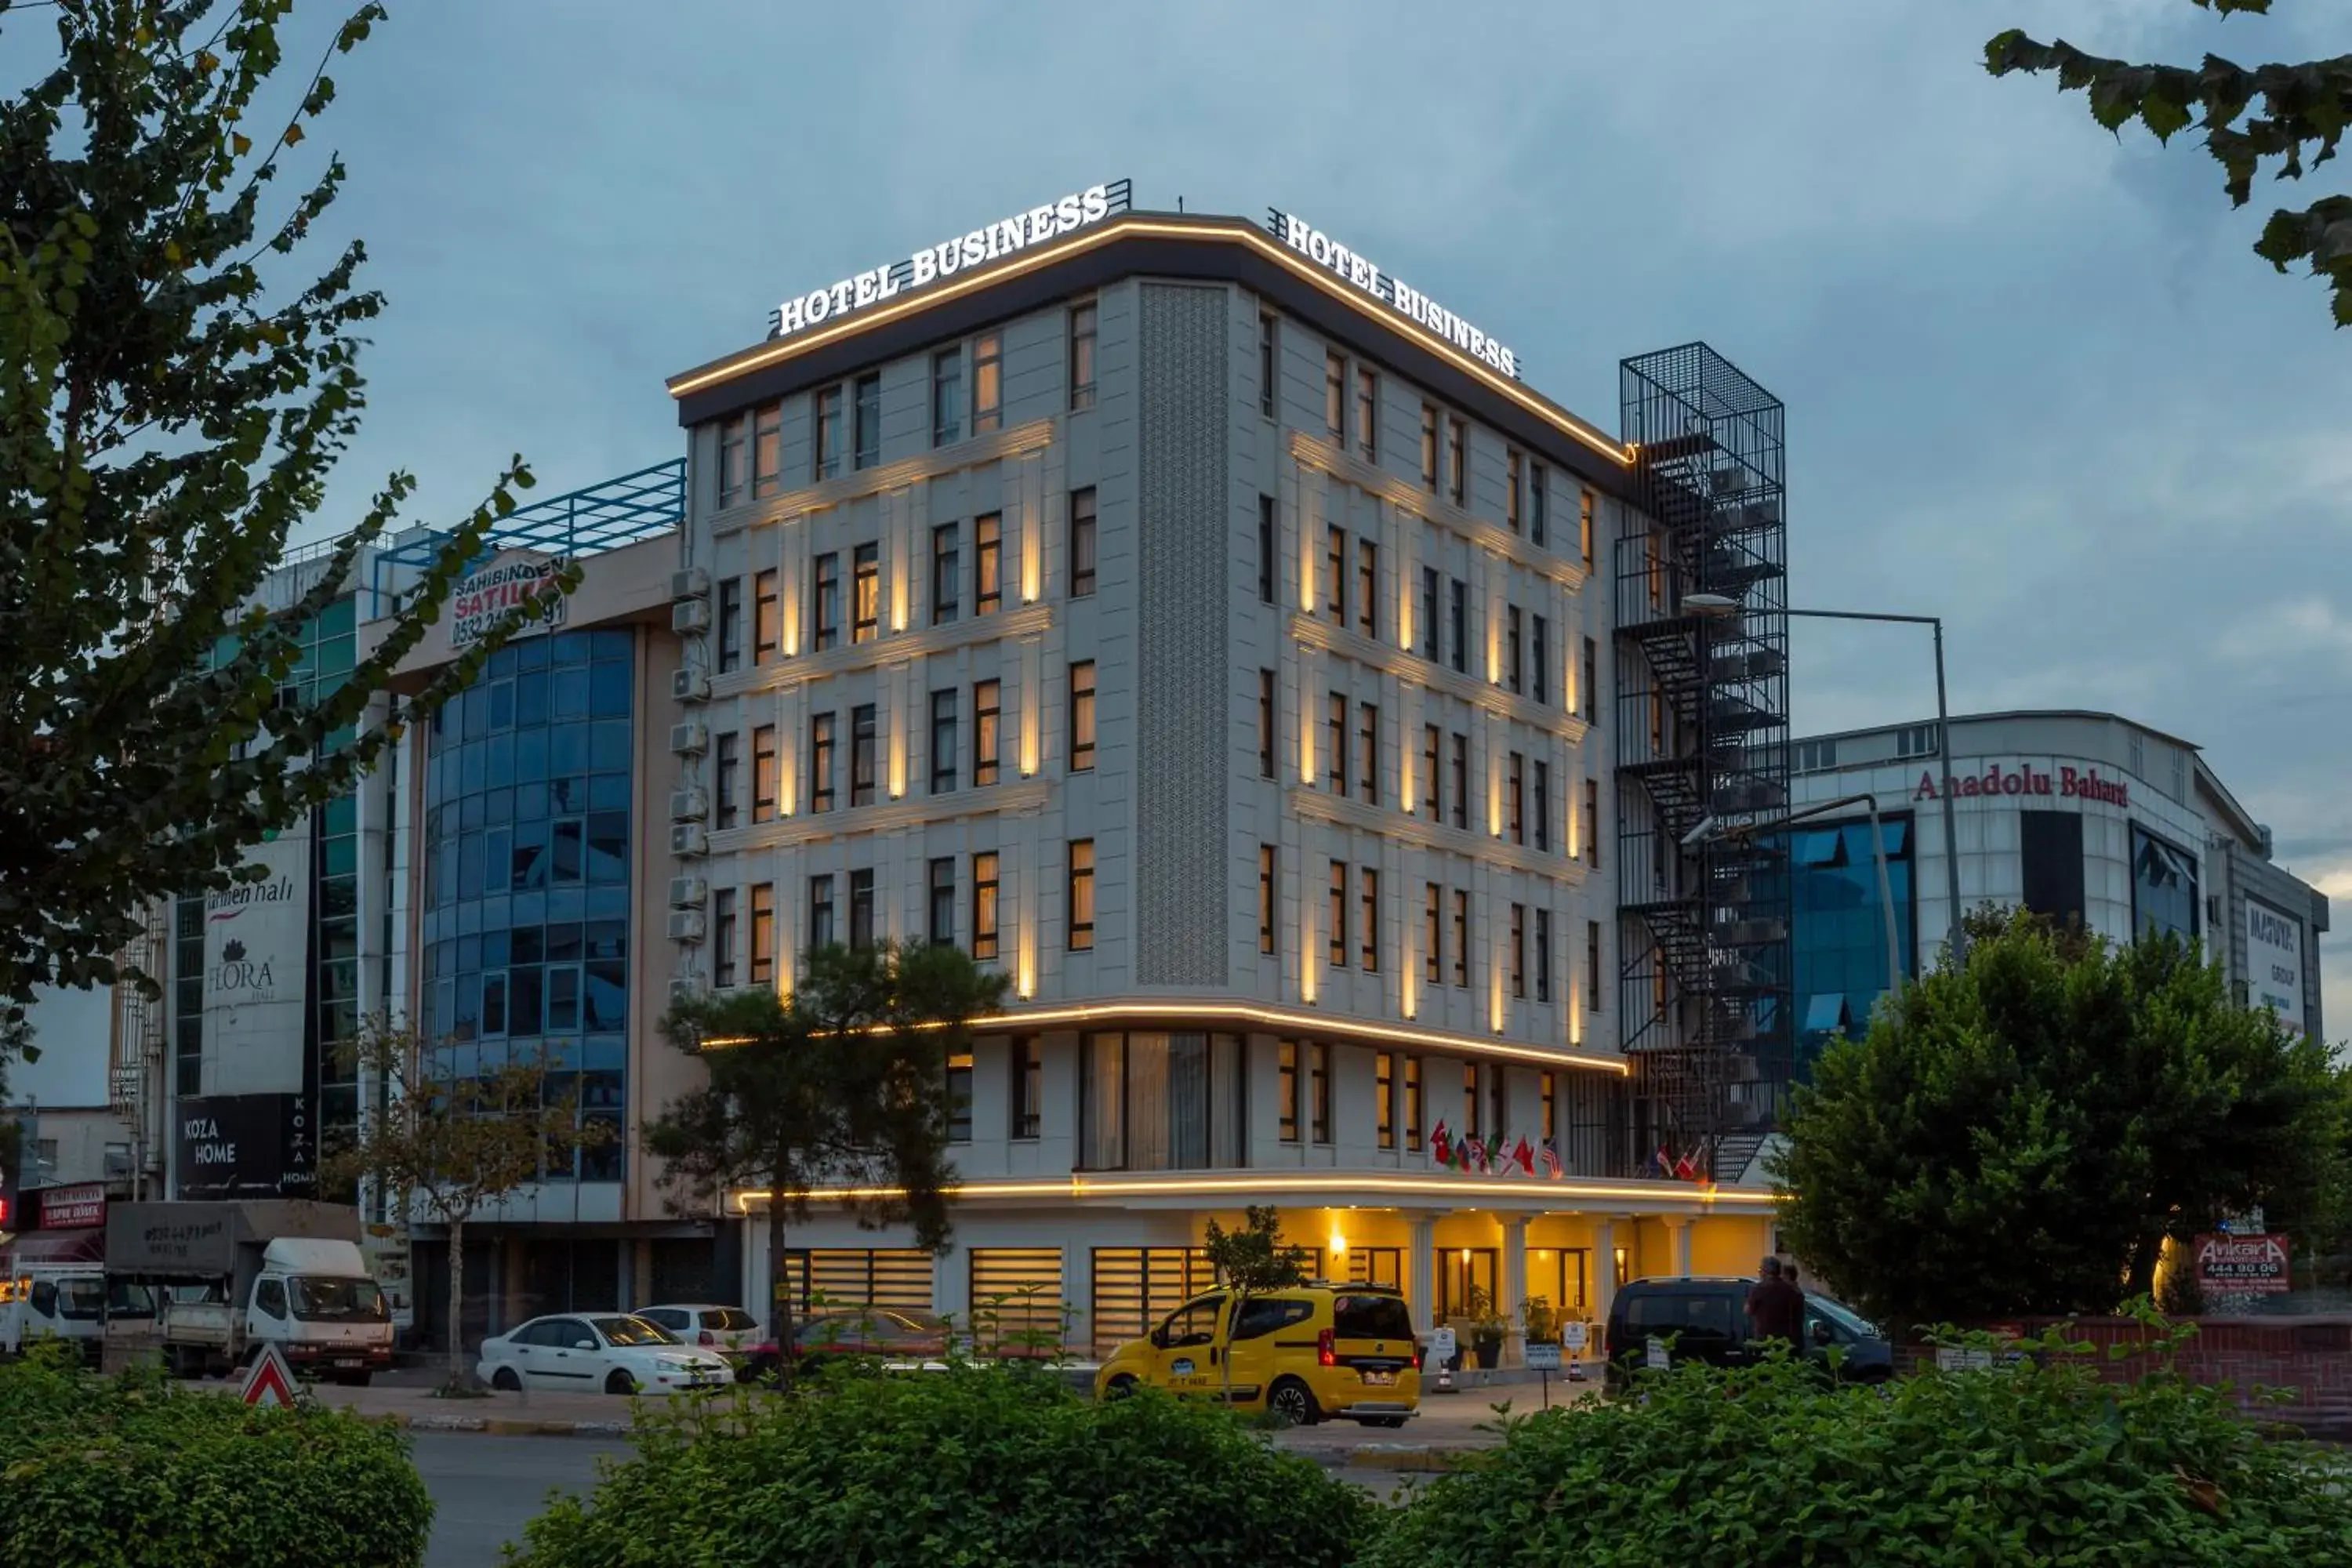 Property Building in Antalya Business Hotel